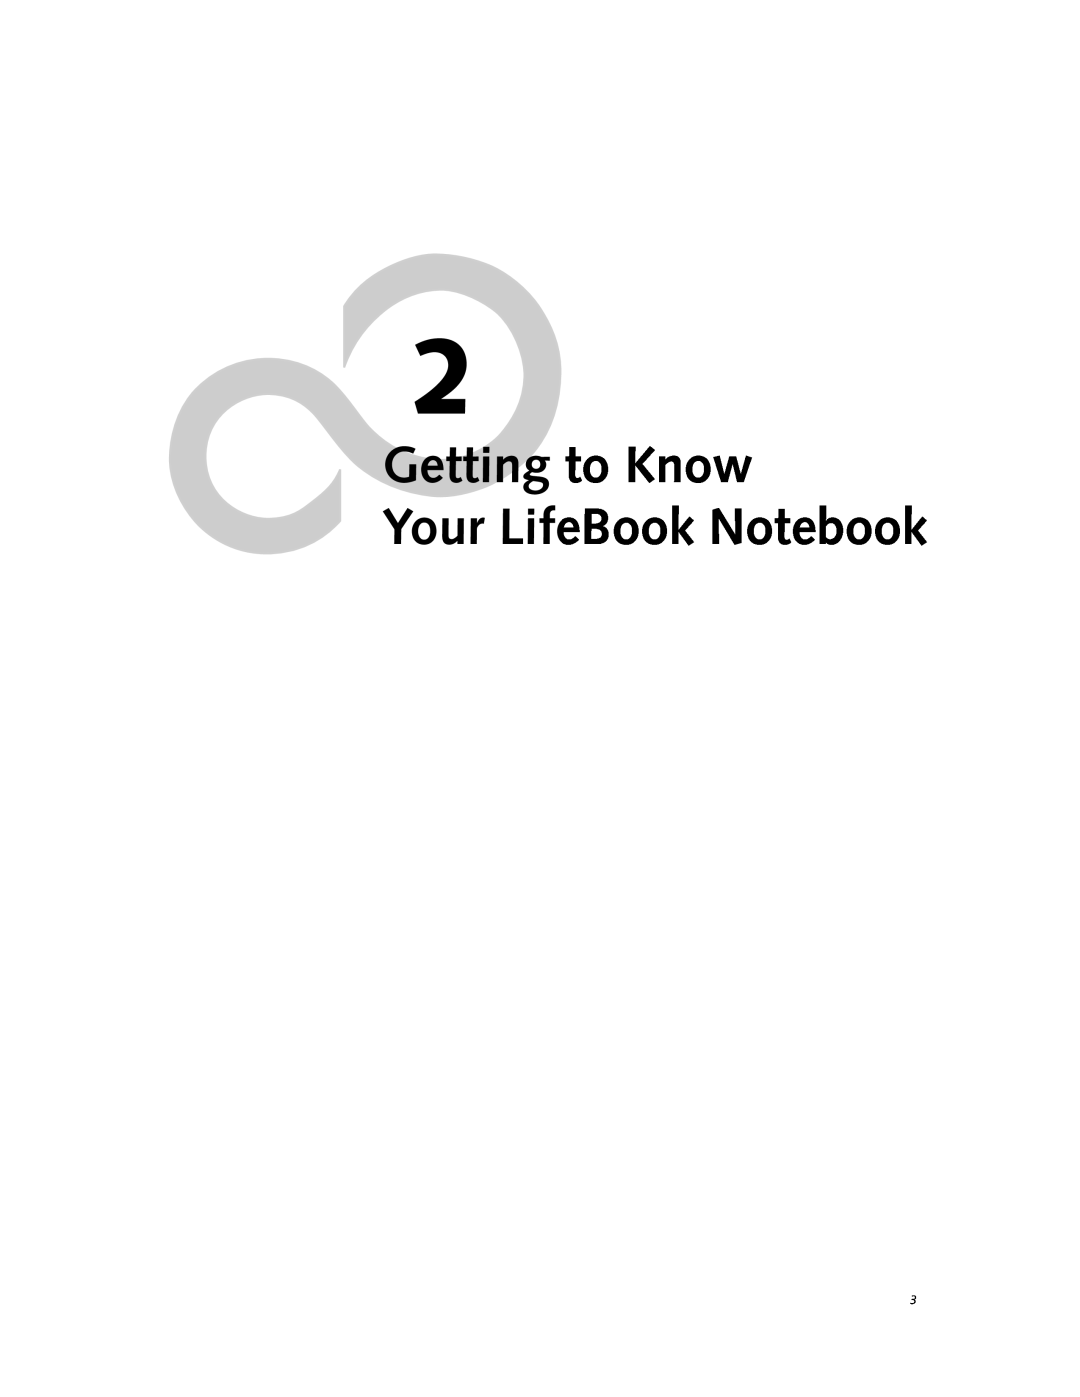 Fujitsu DVD Player manual Getting to Know Your LifeBook Notebook 